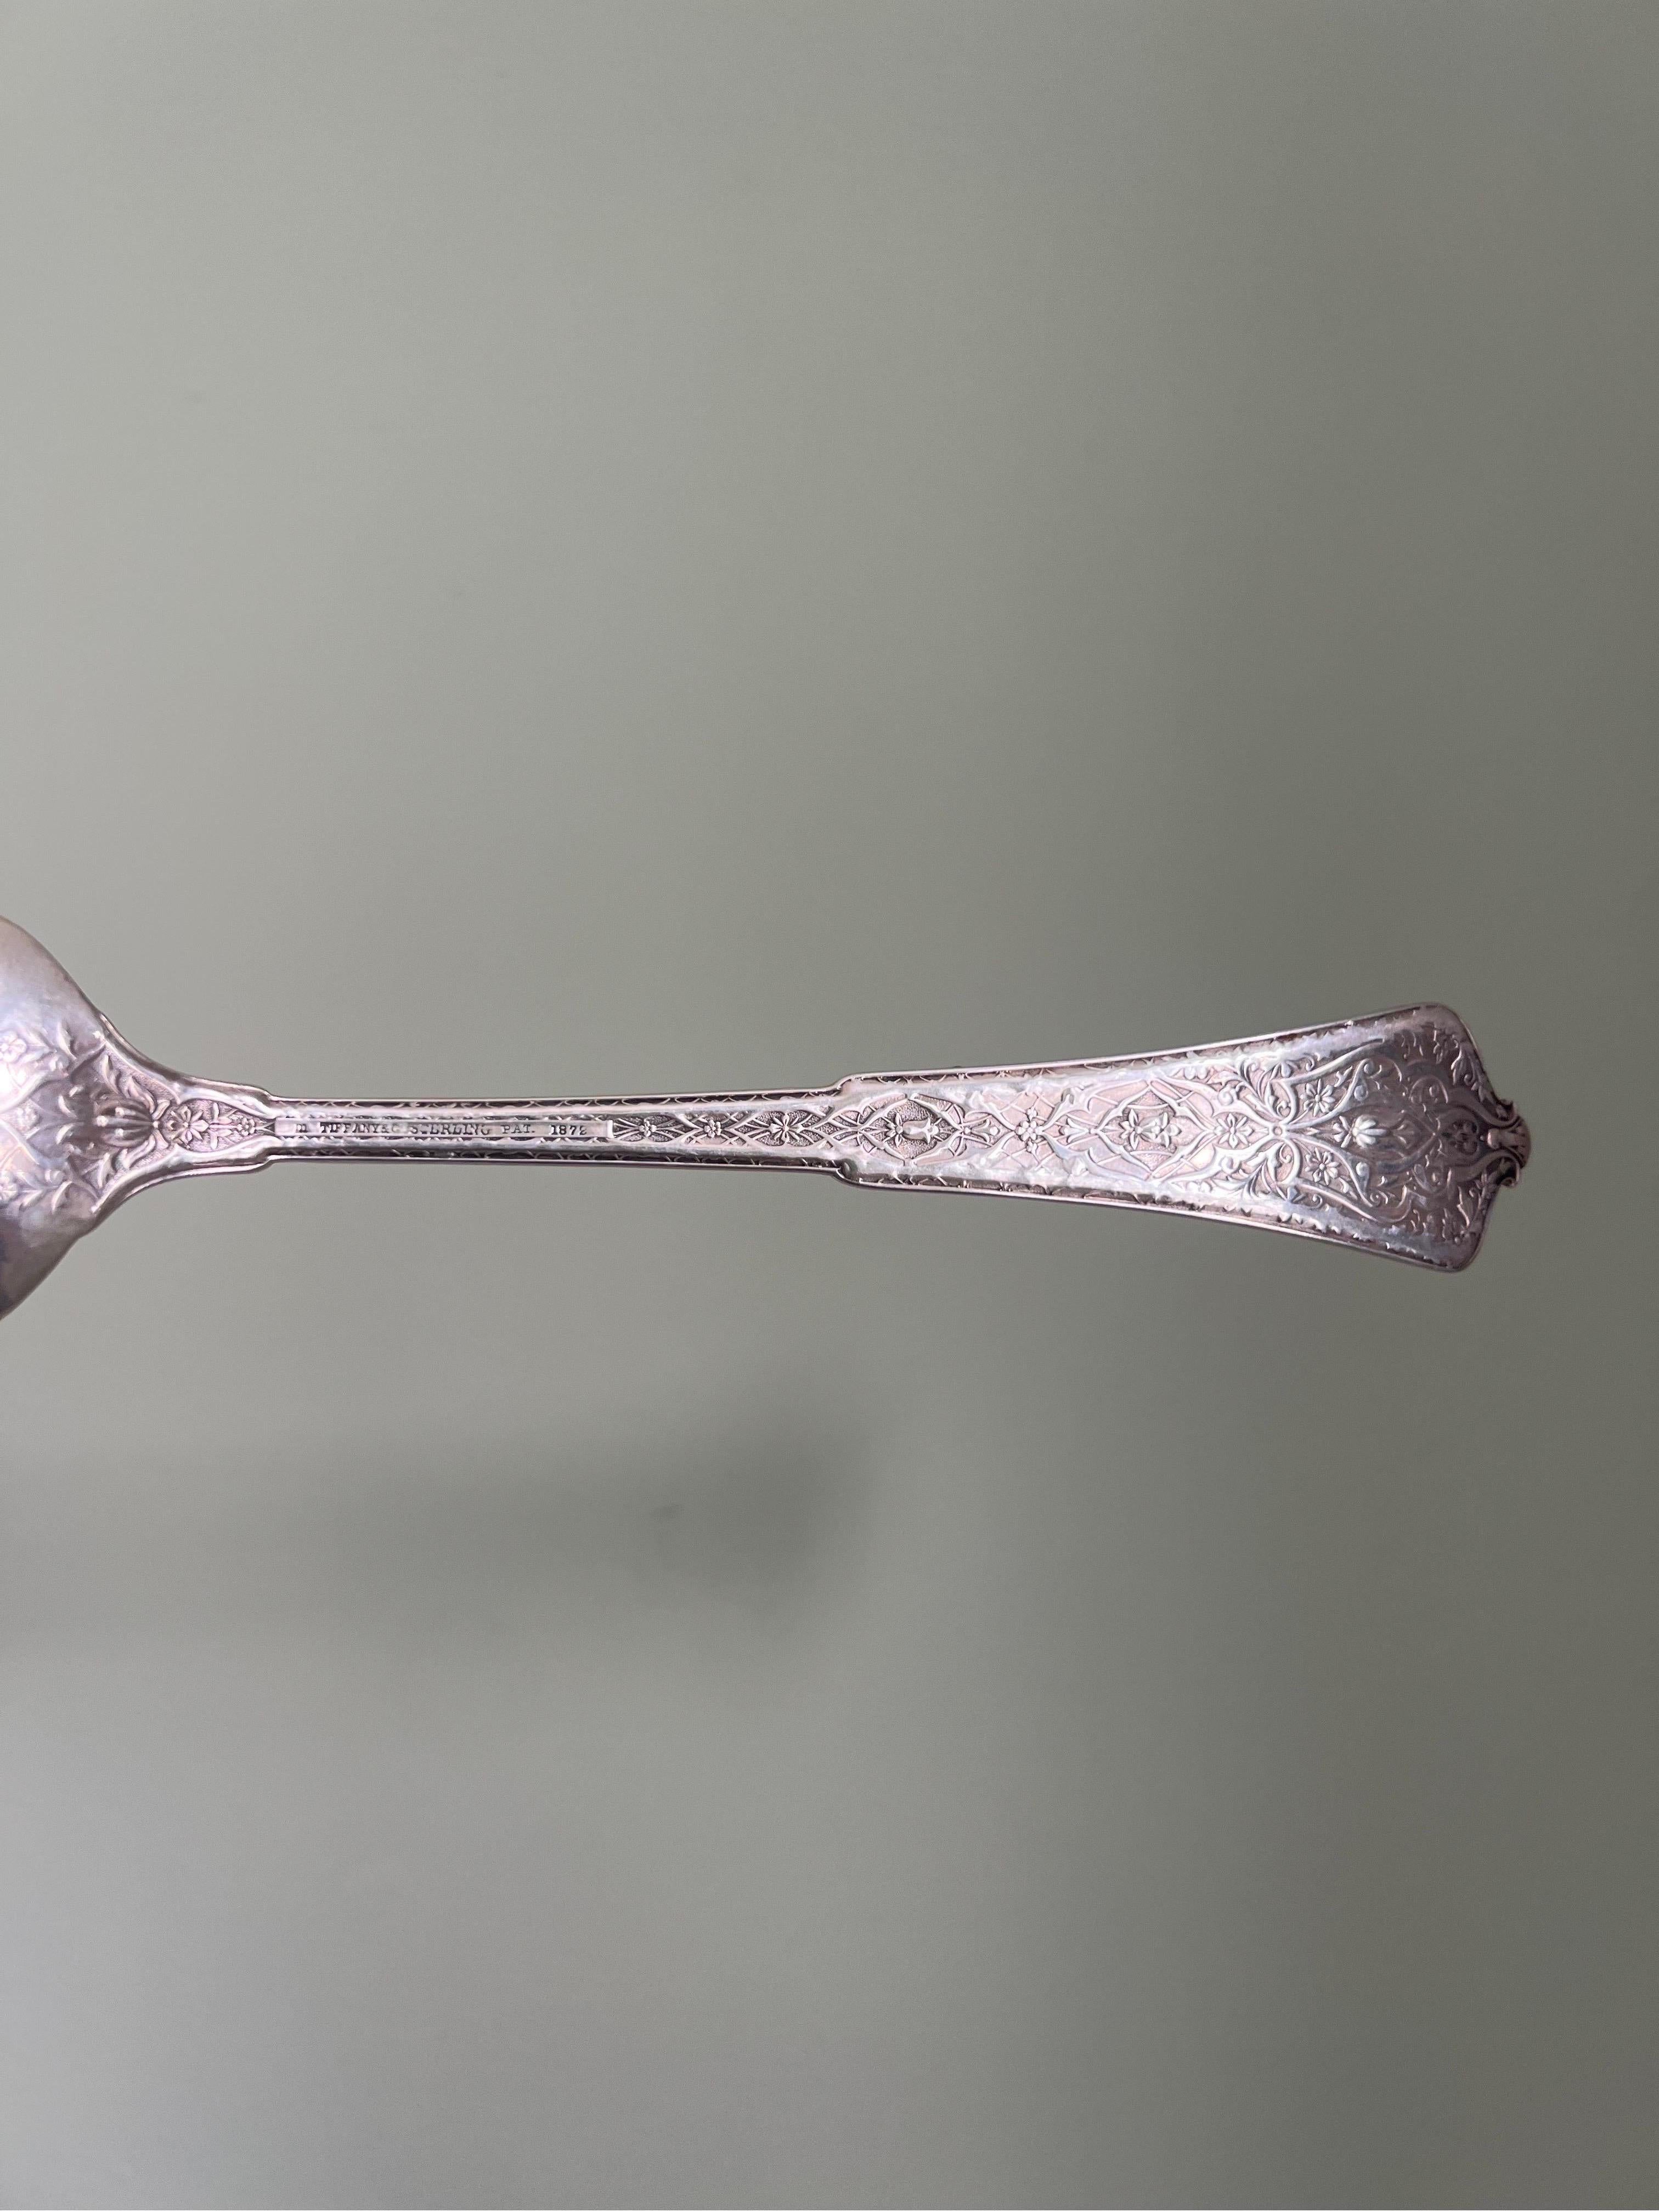 19th Century 1872 Tiffany & Co Persian Pattern Serving or Large Soup Spoon